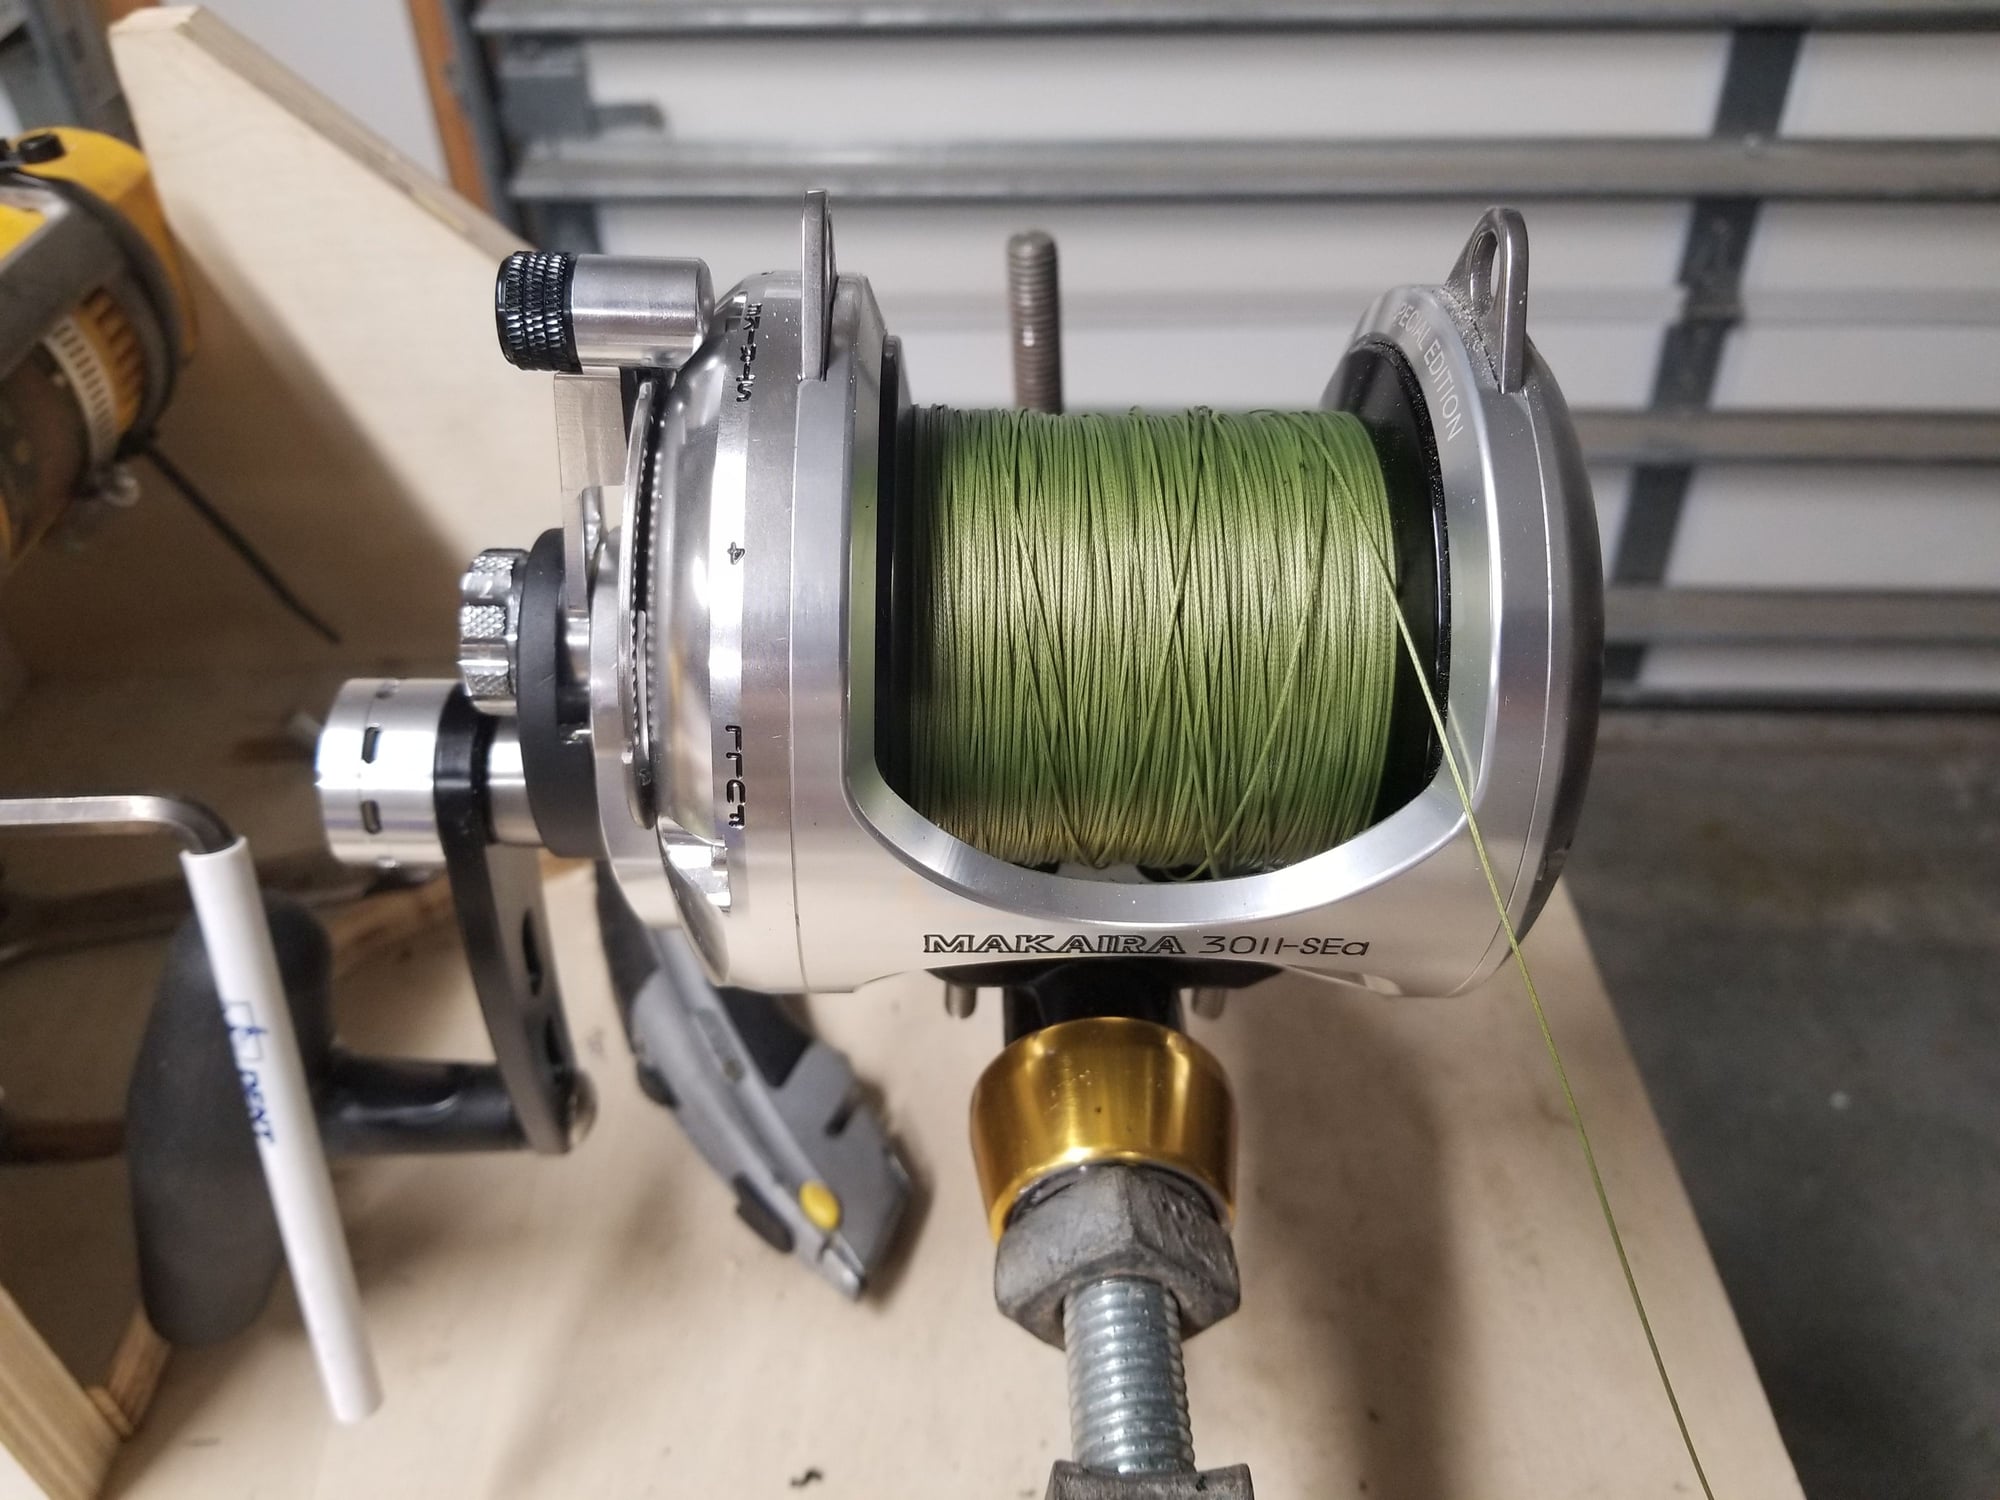 spooling braid -random thoughts - The Hull Truth - Boating and